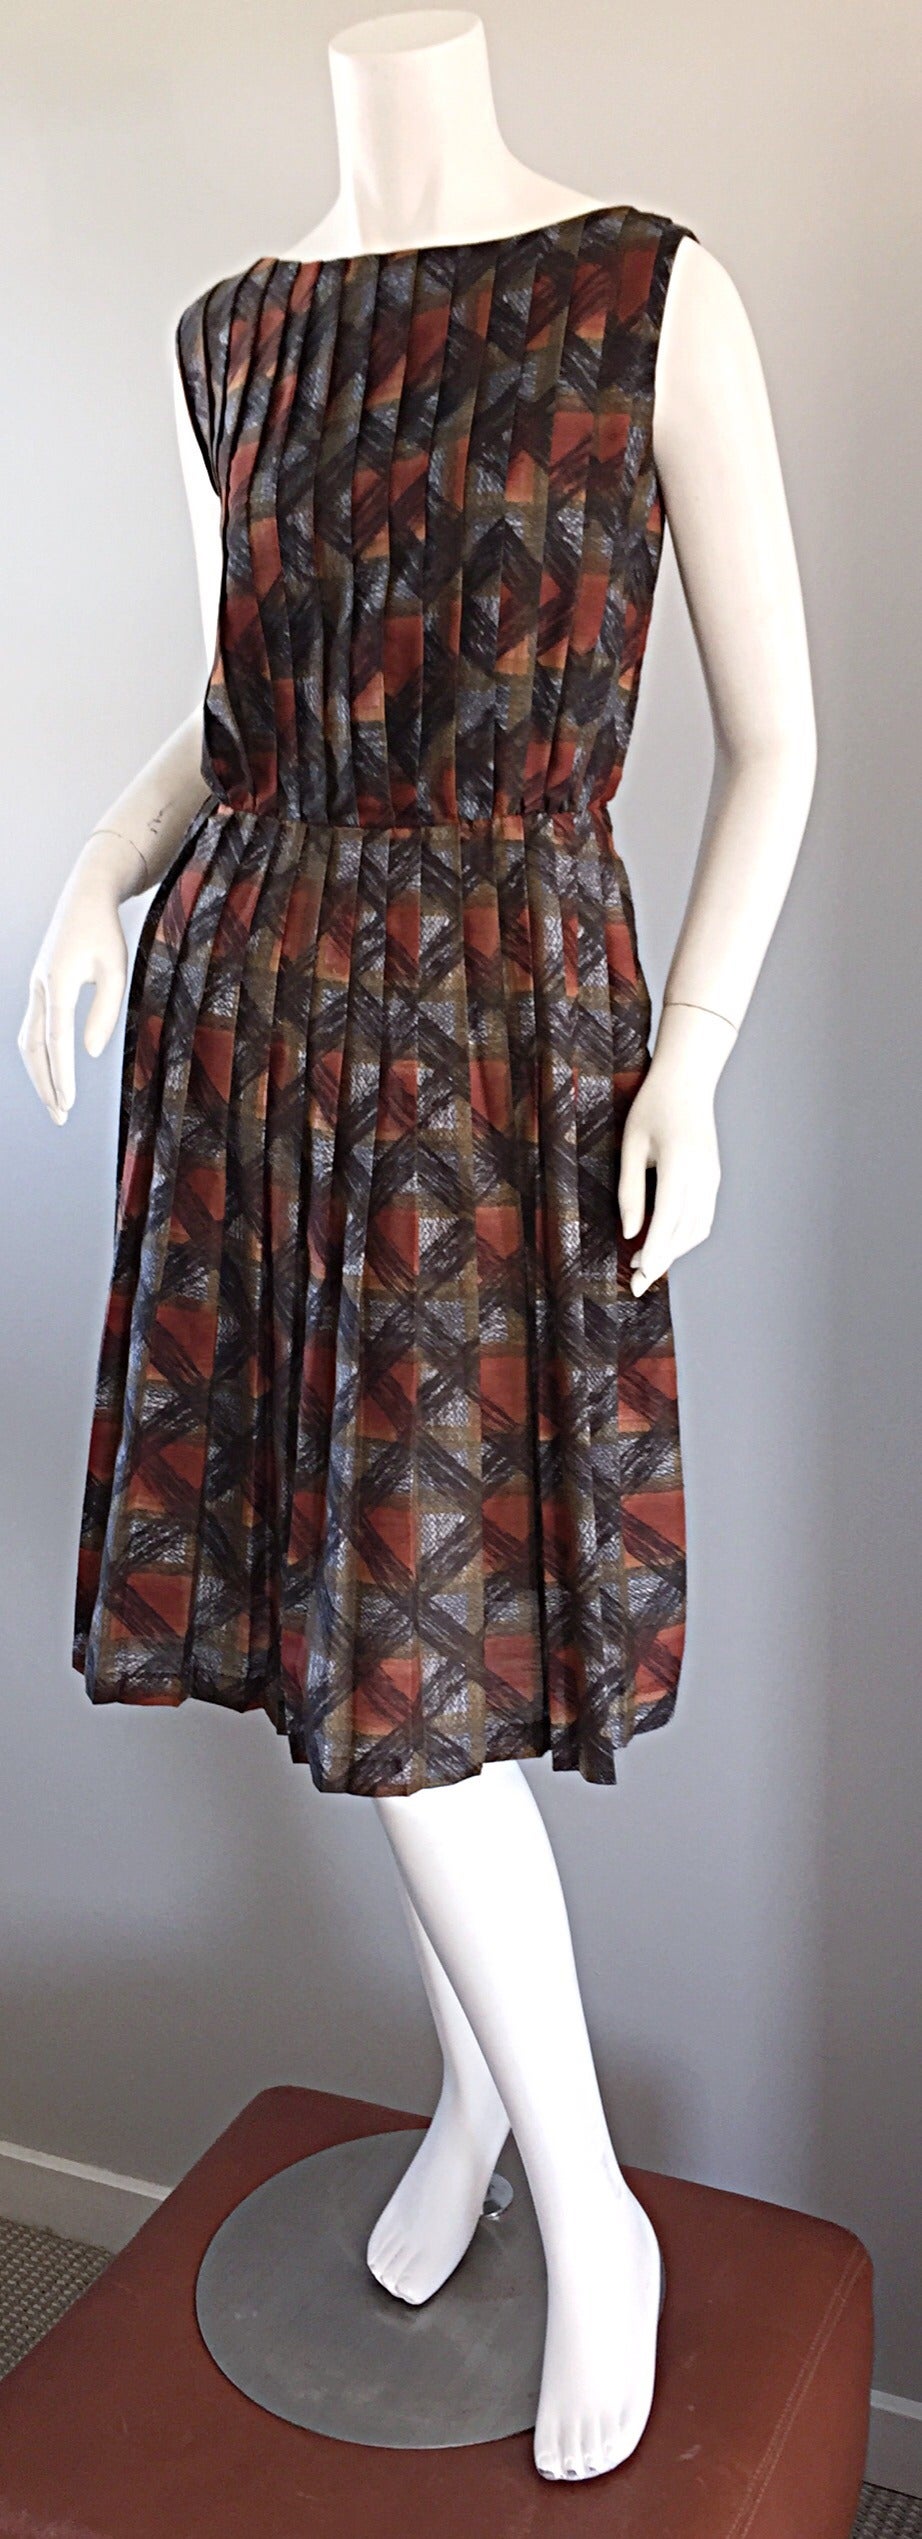 Chic 1950s 'Autumnal' pleated cotton dress! Warm tones, in plaid, with three dimensional contrasting black sketched plaid throughout. Pleated bodice and skirt, that looks sensational on the body! Looks great alone, or with a belt. Easily transitions